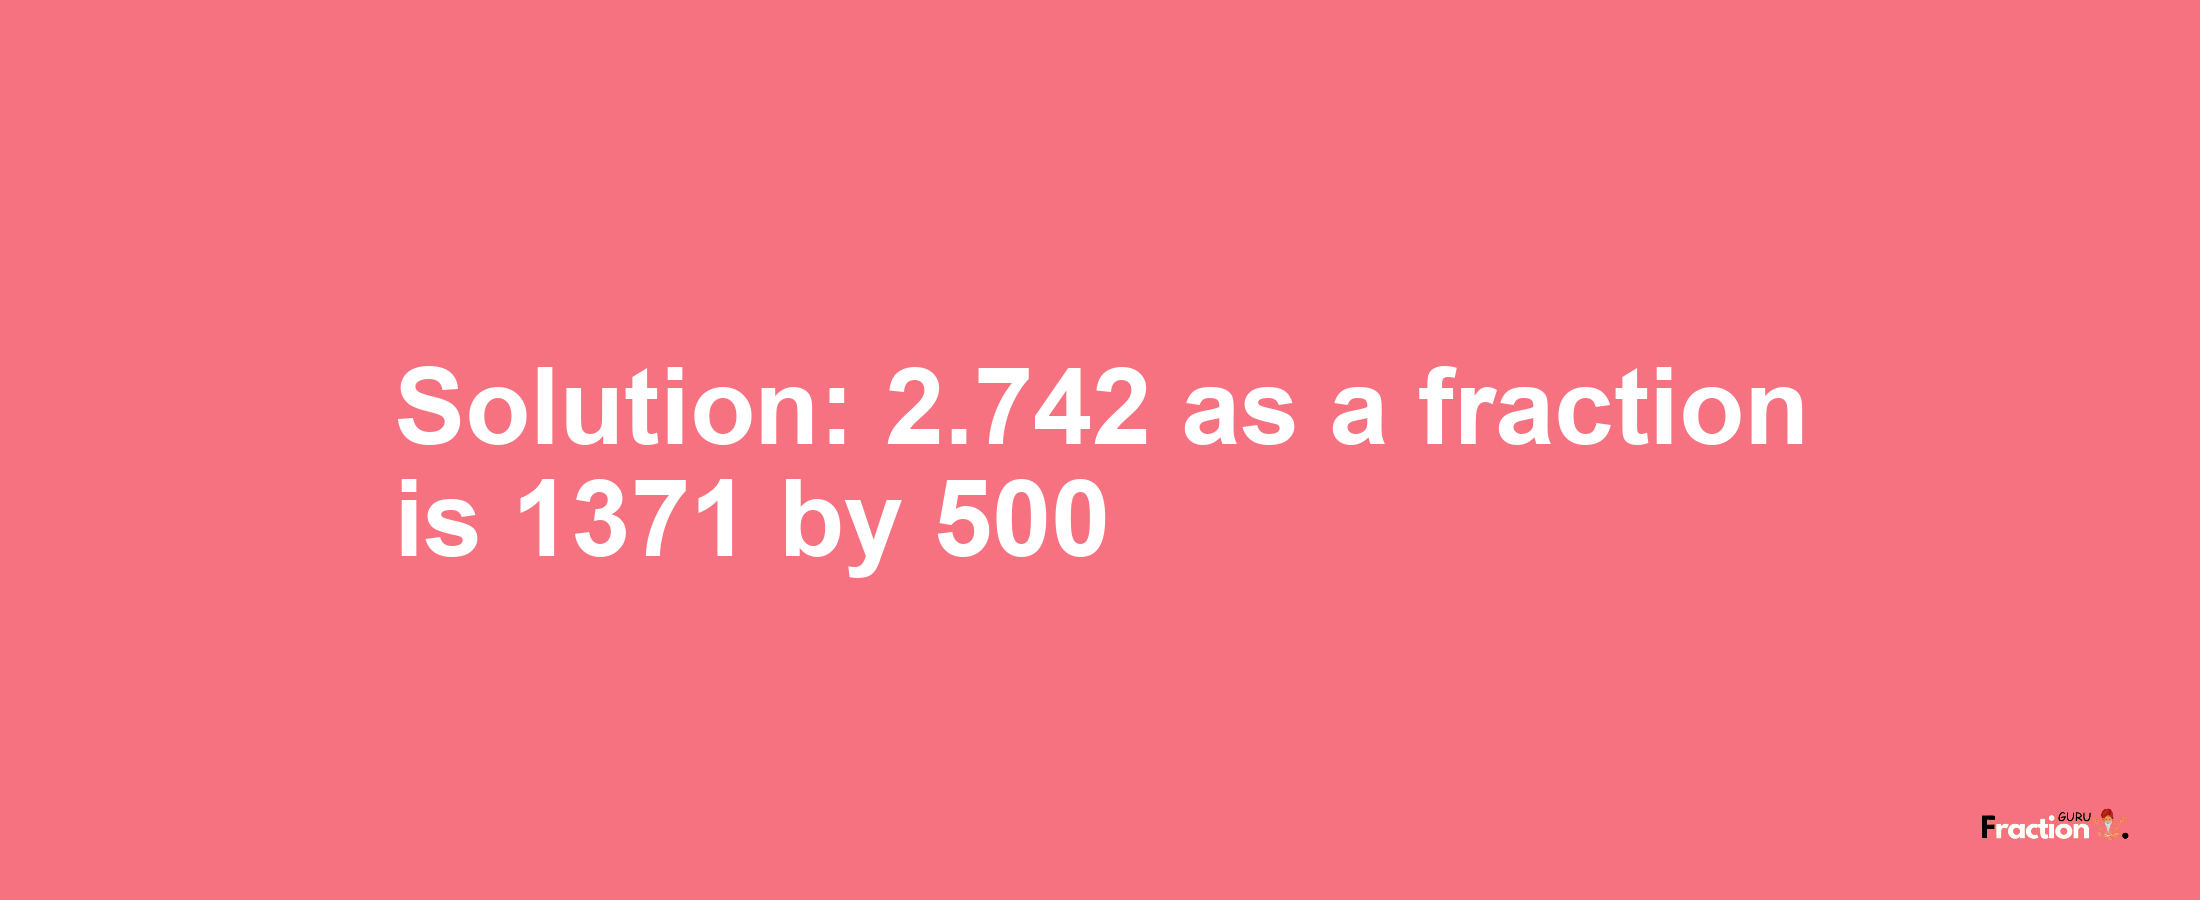 Solution:2.742 as a fraction is 1371/500